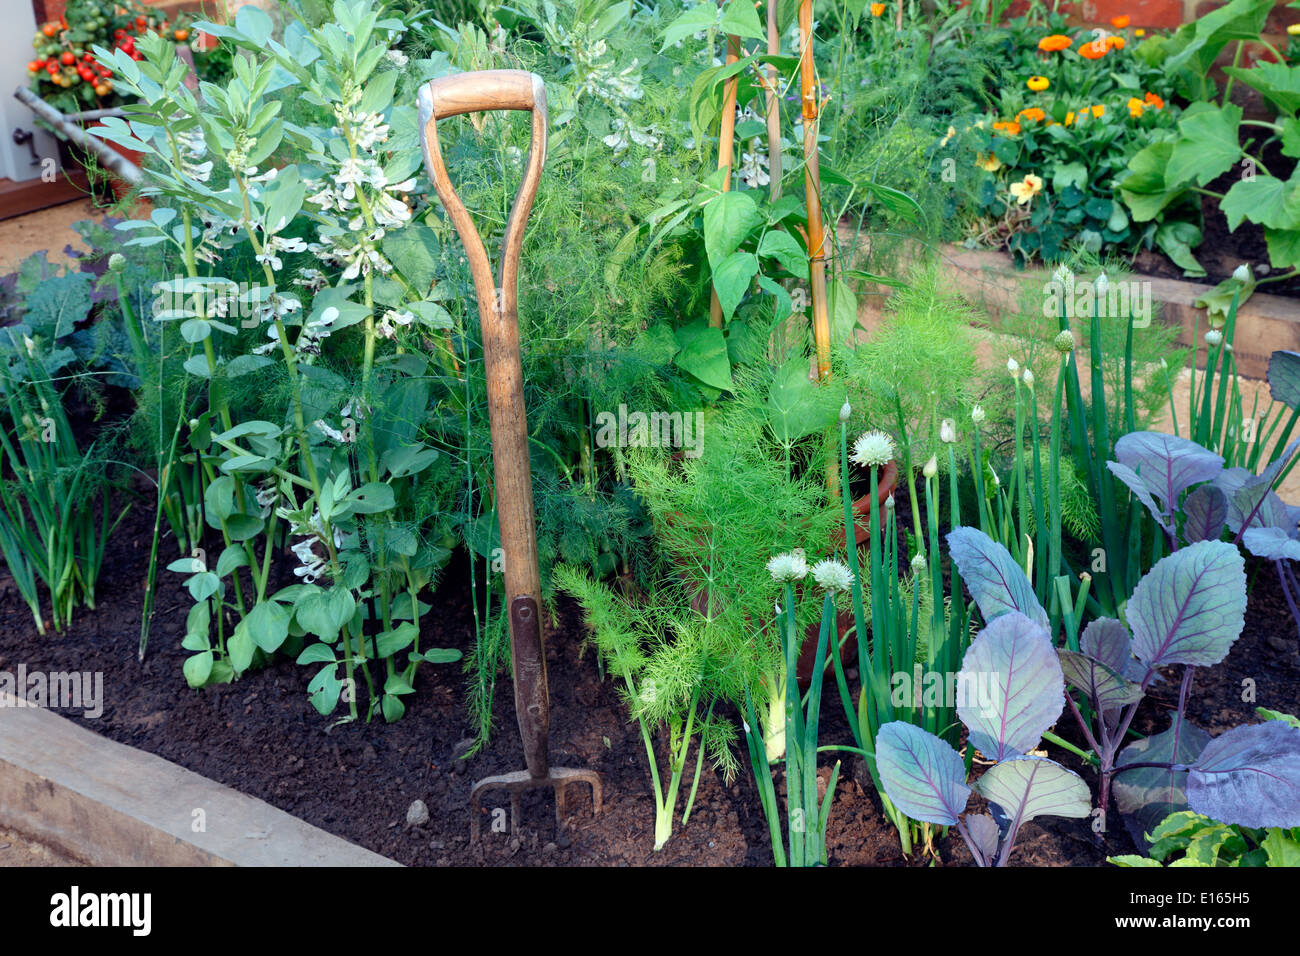 Vegetable patch at the Chelsea Flower Show Stock Photo